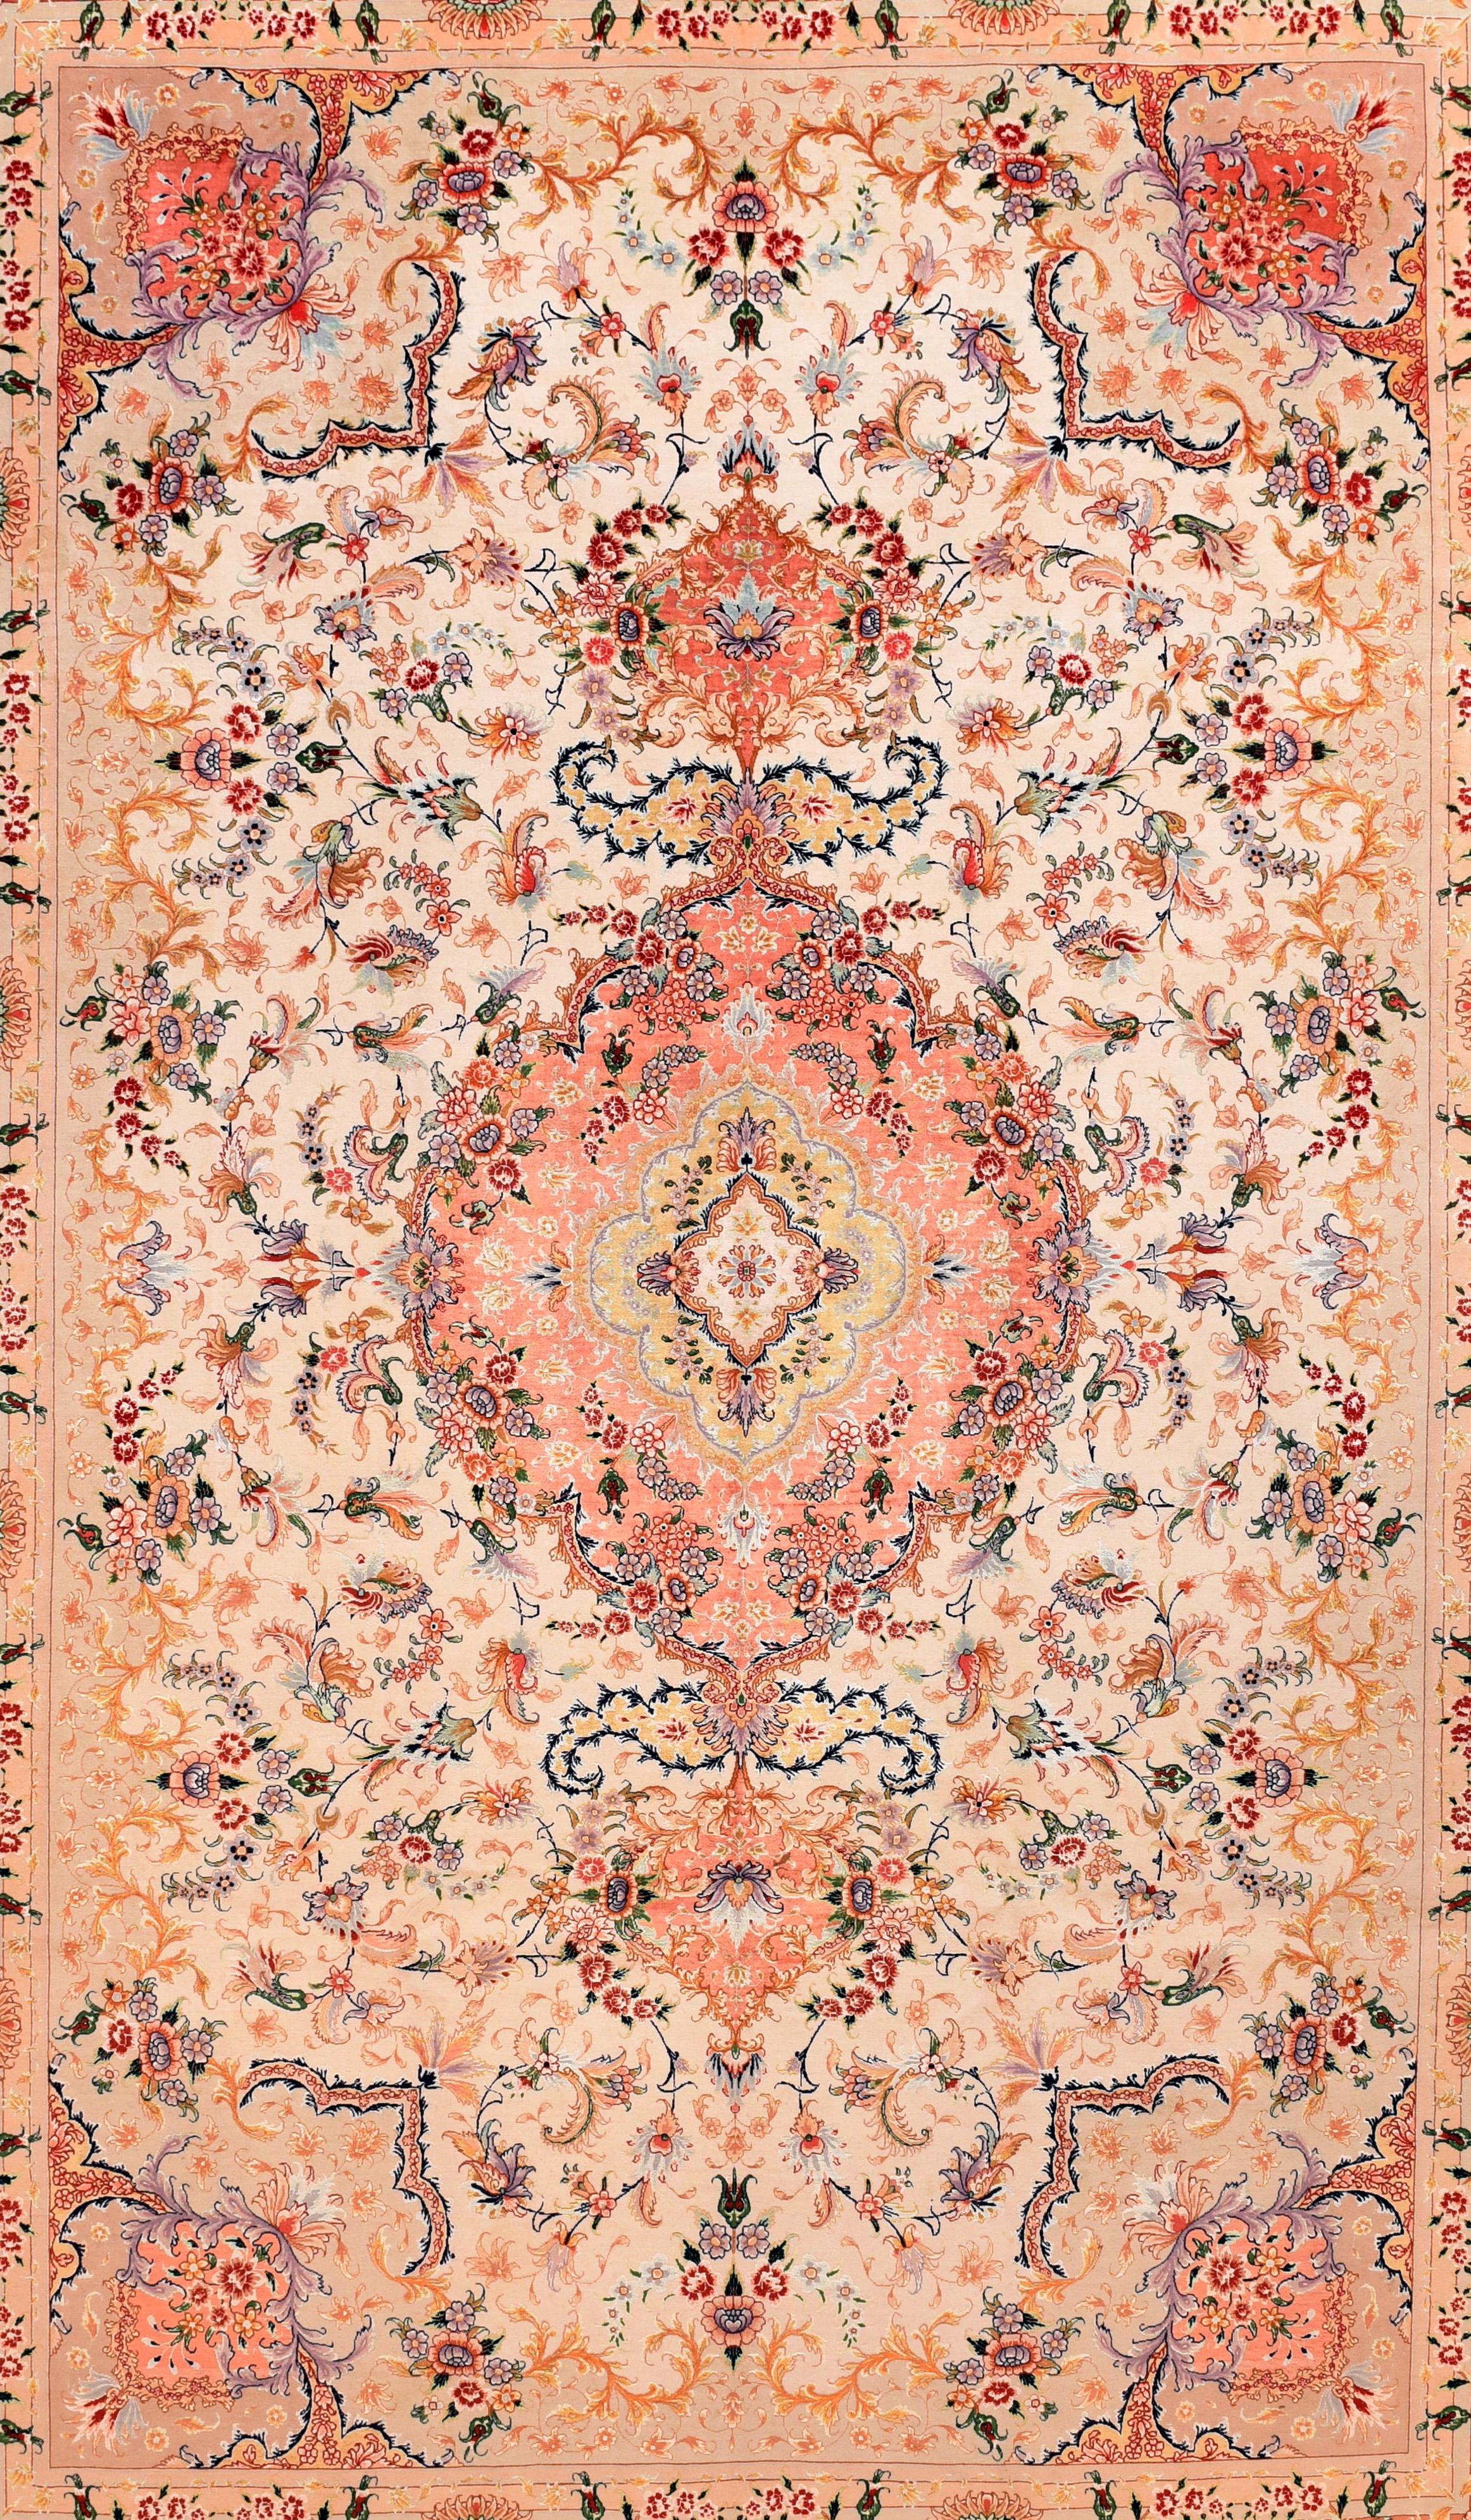 Extremely Fine Persian Tabriz Wool & Silk Soven by the artist Master Weaver  In Good Condition For Sale In New York, NY